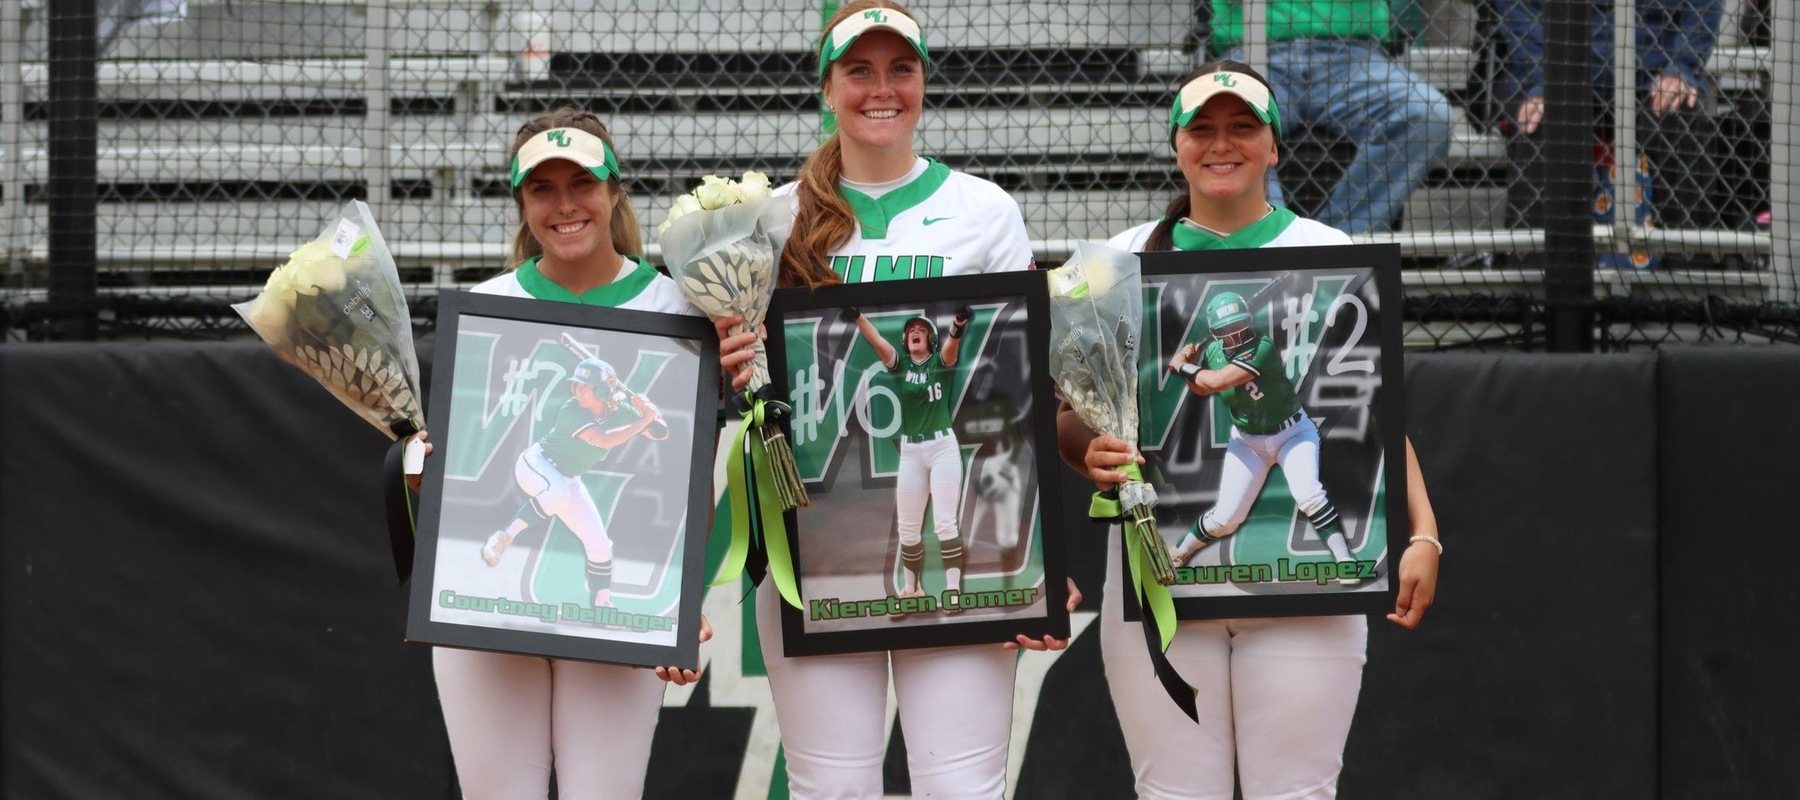 Photo of the seniors Courtney Dellinger, Kiersten Comer, and Lauren Lopez on Senior Day. Copyright 2022; Wilmington University. All rights reserved. Photo by Erin Harvey. April 23, 2022.